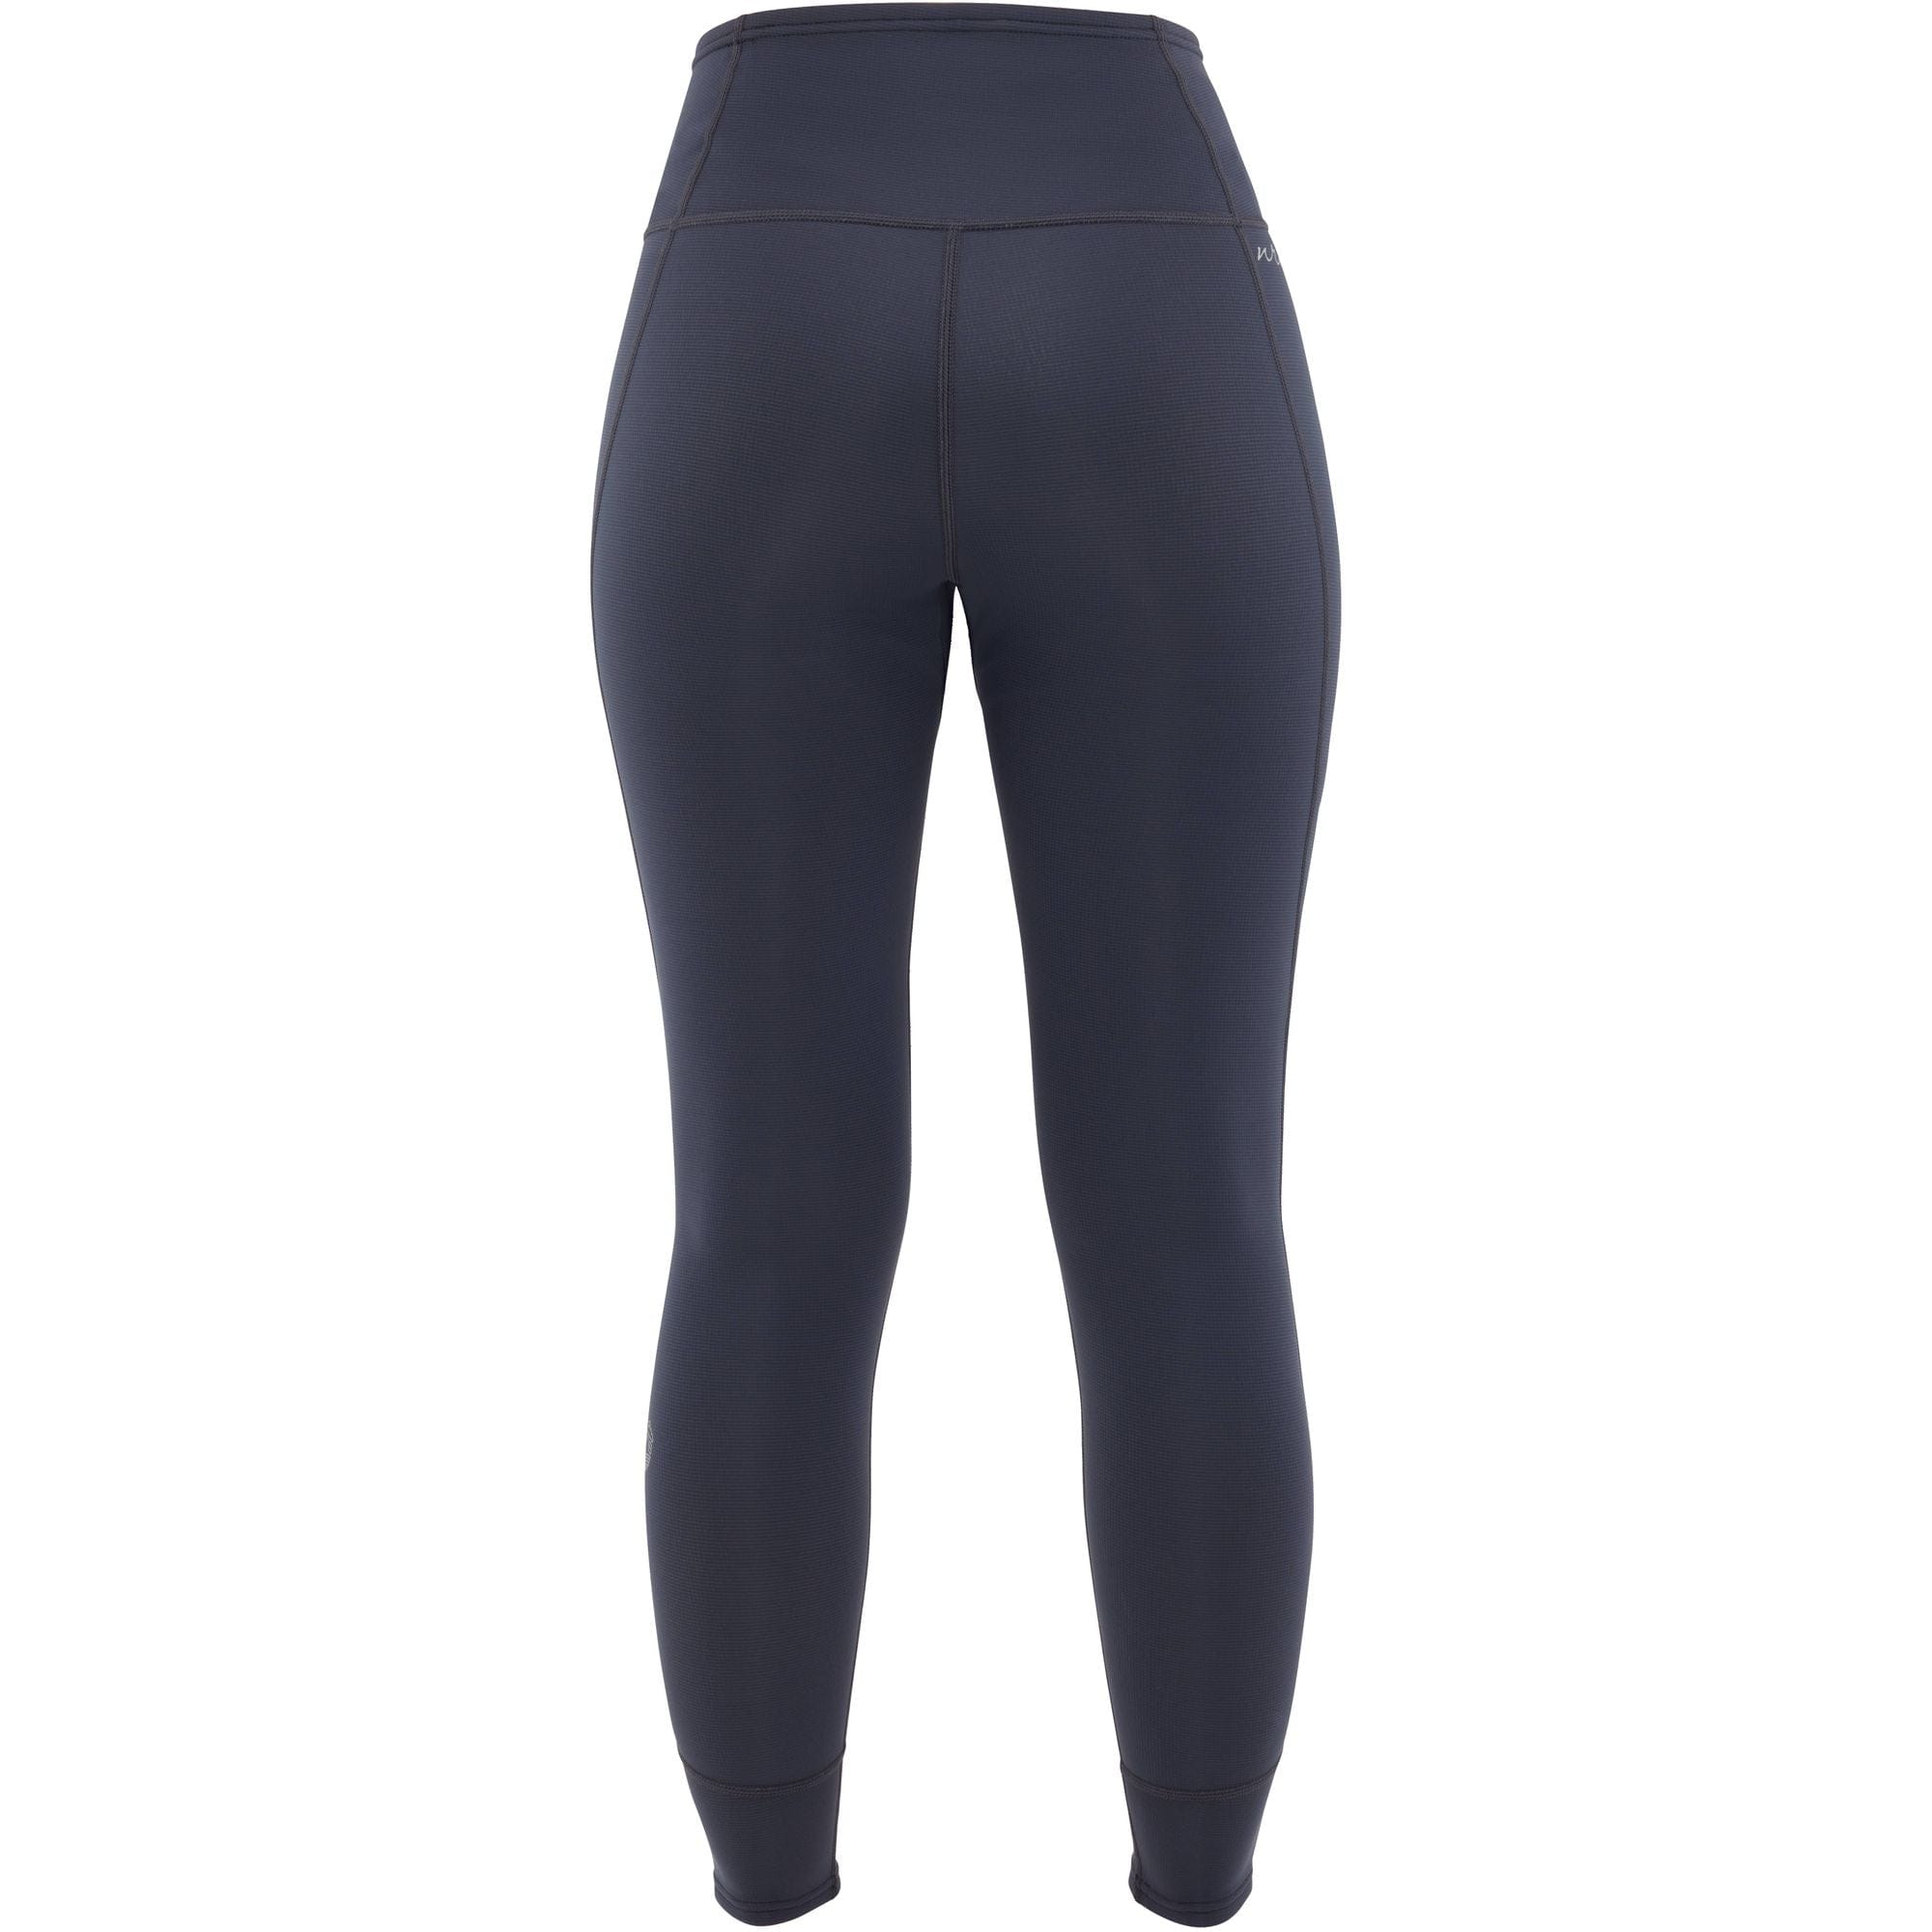 2023 NRS Women's HydroSkin 0.5 Pant Closeout